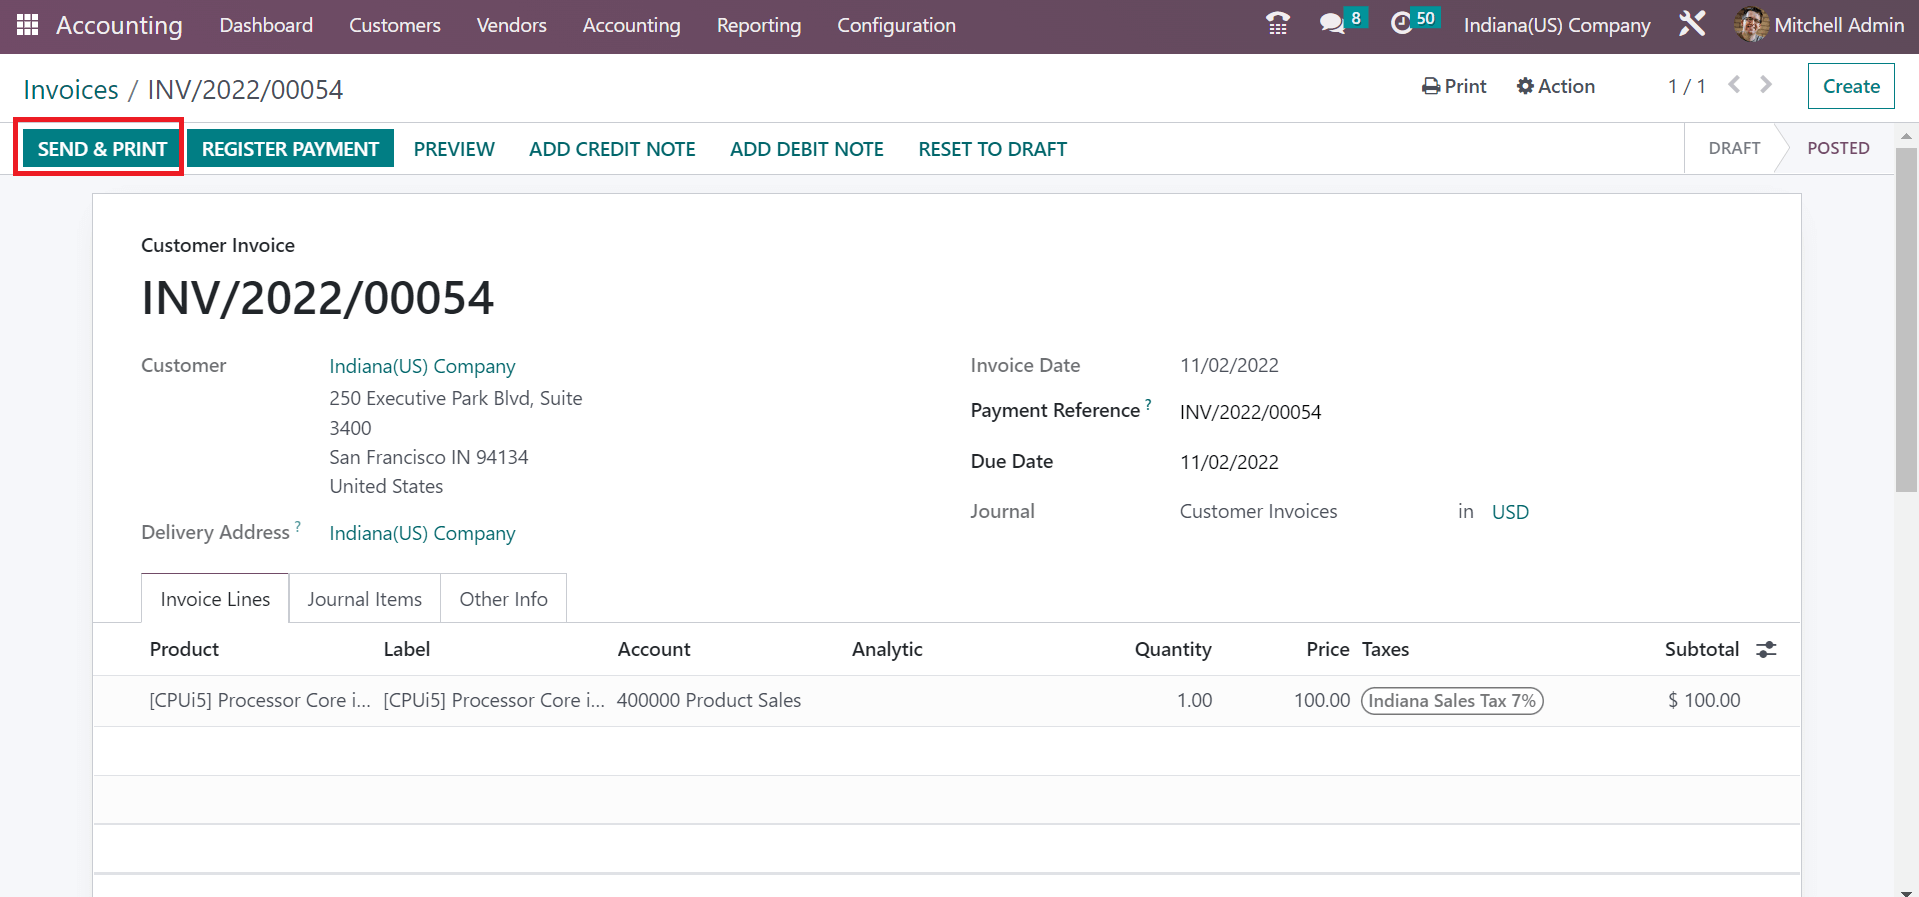  how-to-calculate-indiana-us-sales-tax-in-odoo-16-accounting-cybrosys